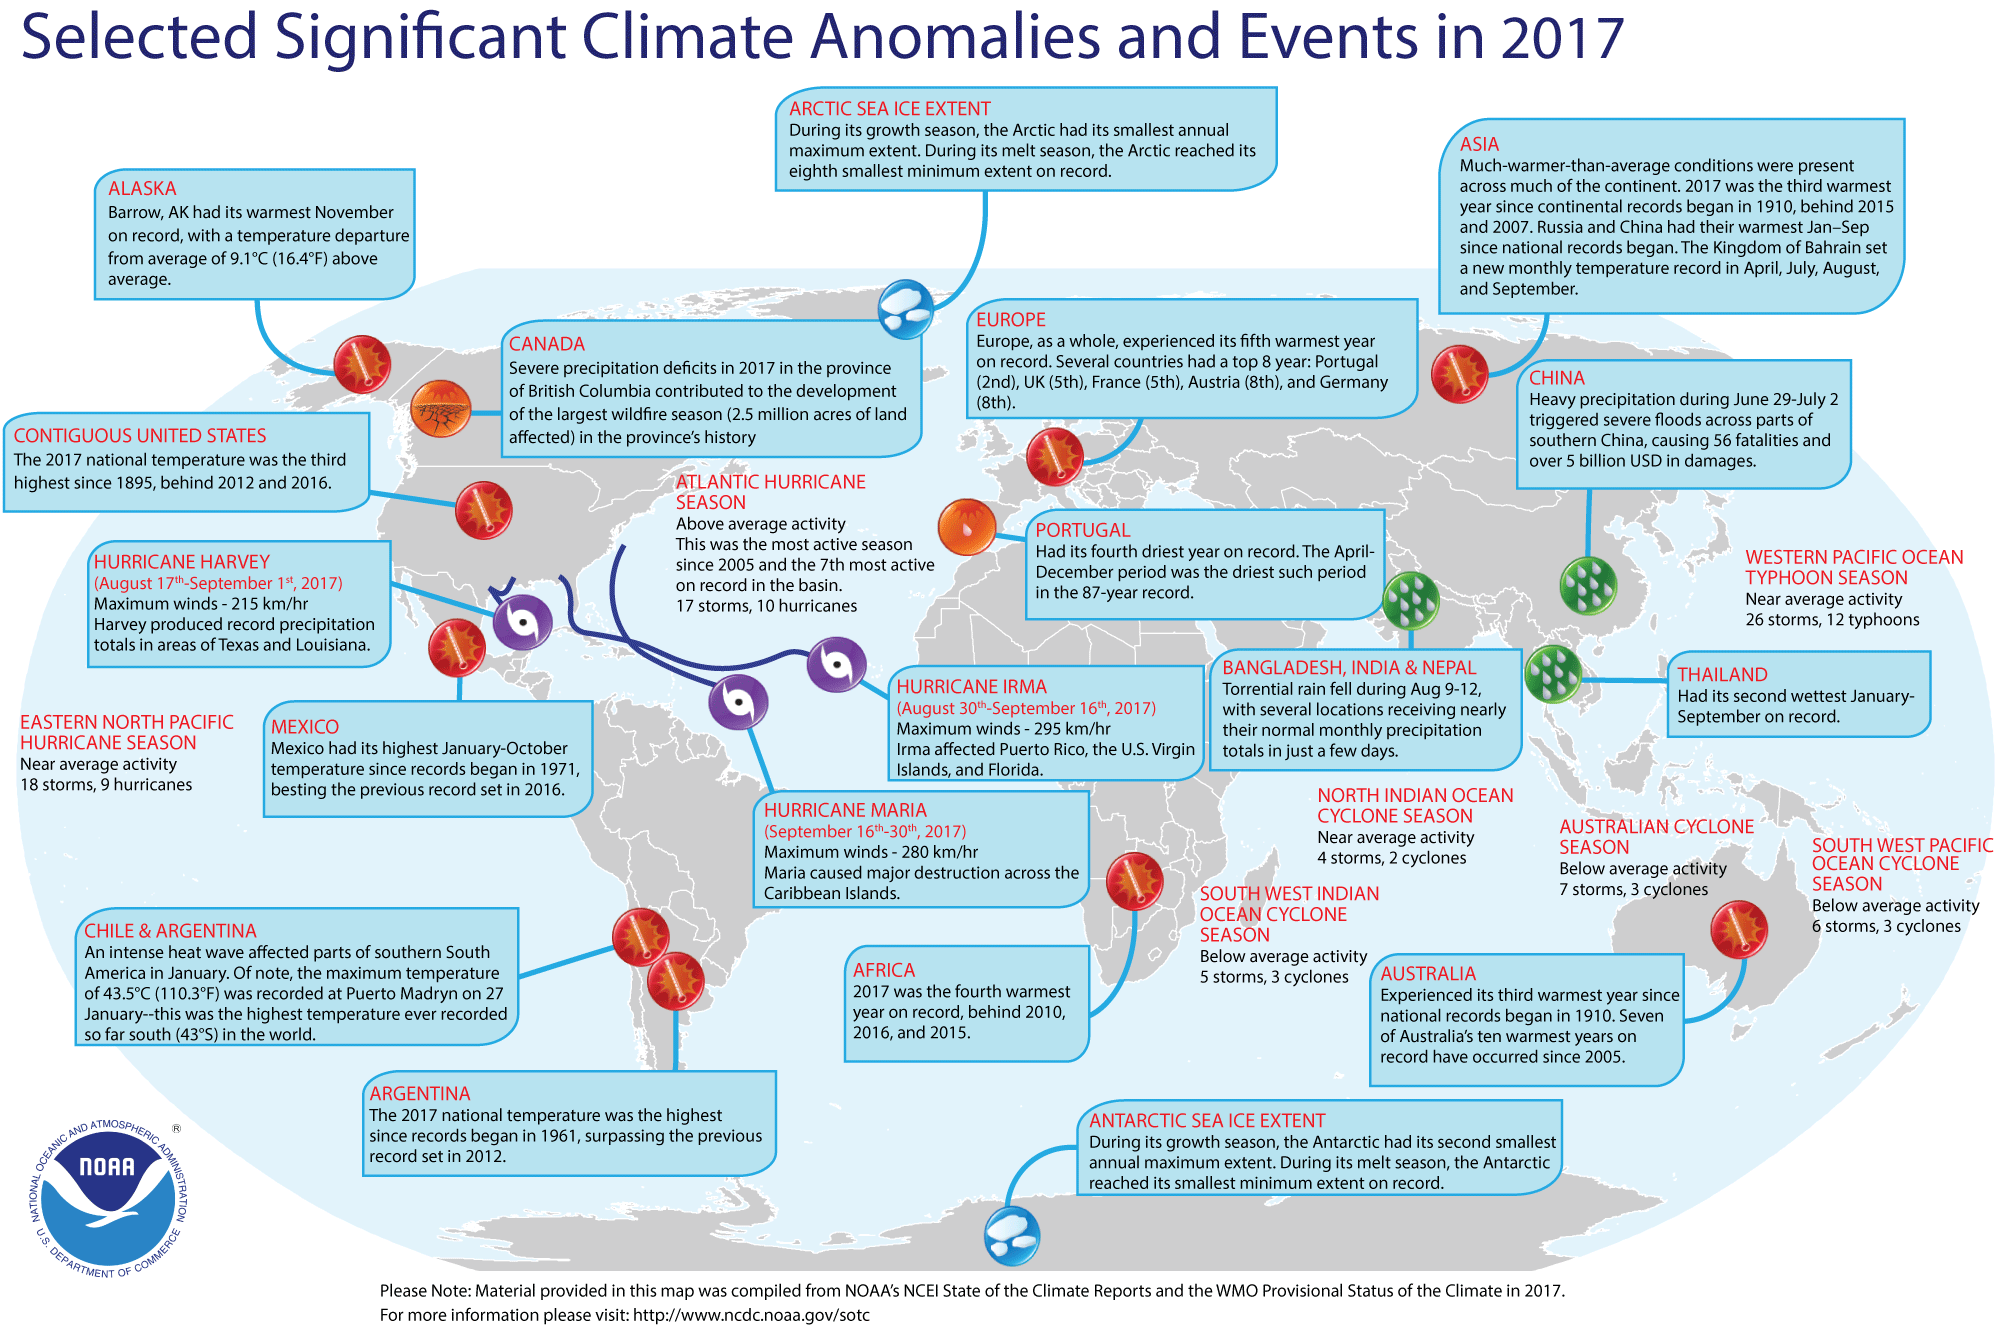 annual-2017-global-climate-report-national-centers-for-environmental-information-ncei